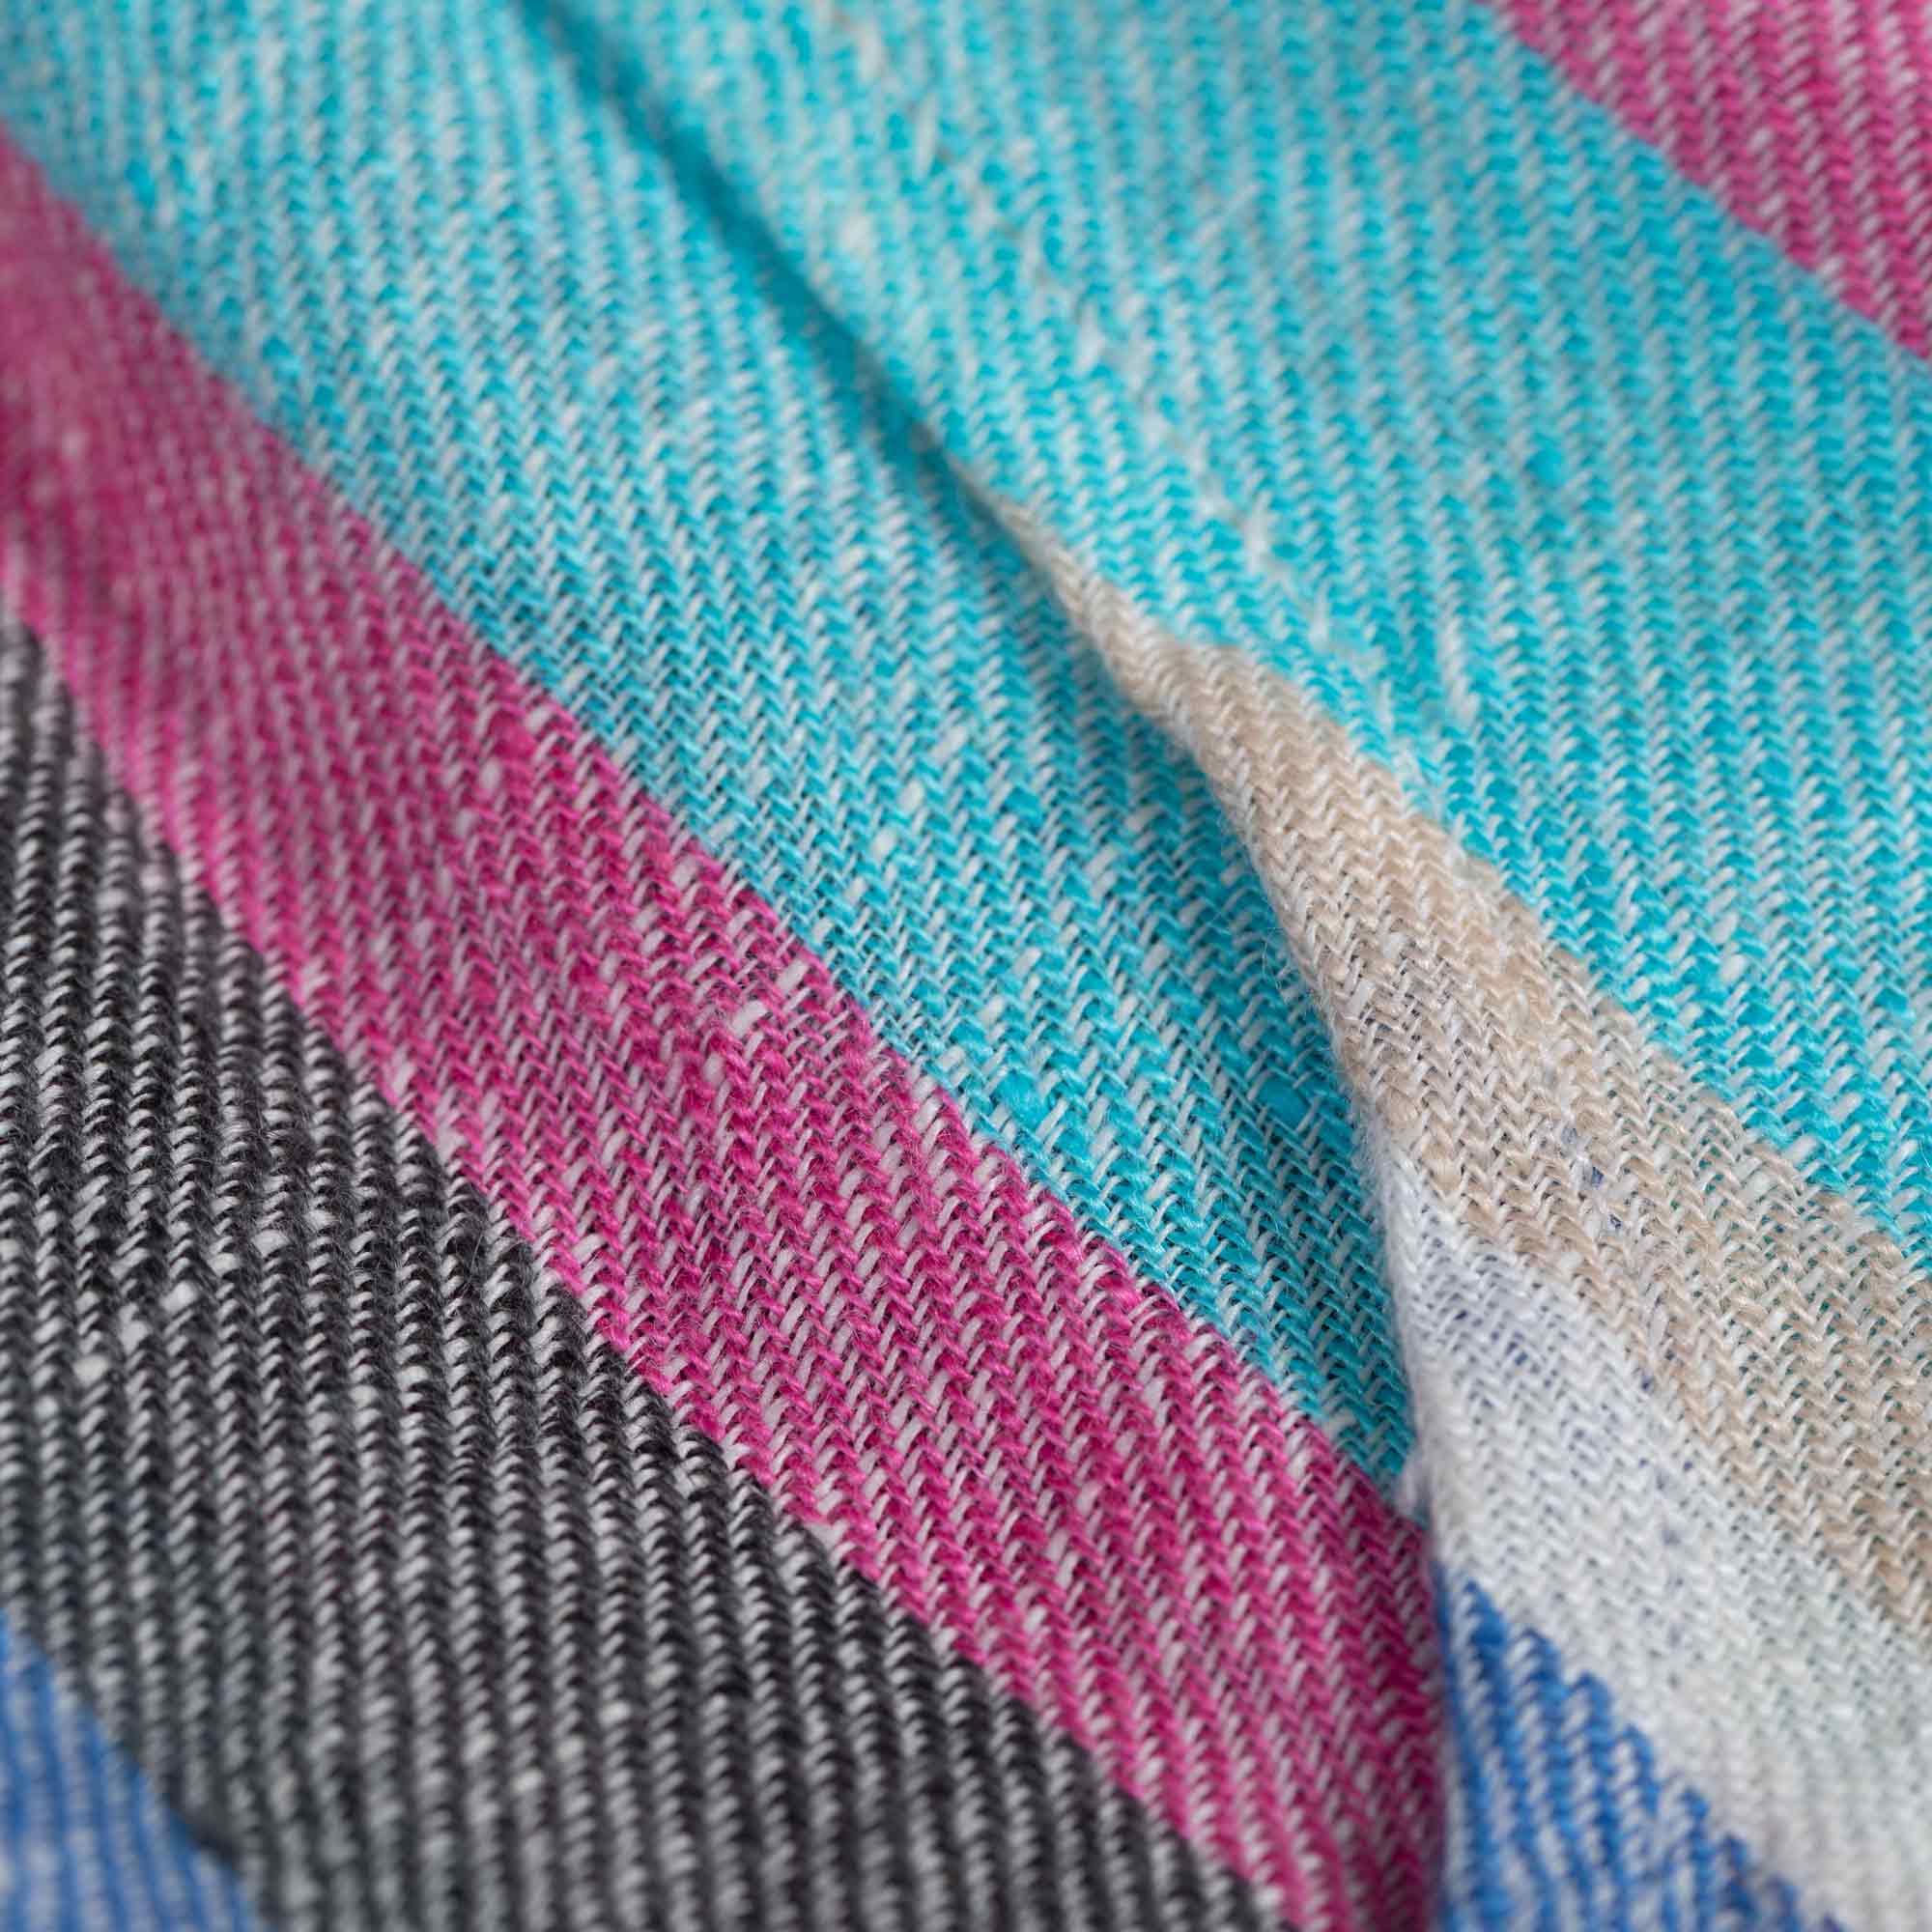 A close-up detail image showcasing the quality and vibrant color of the shorts shown in the above image